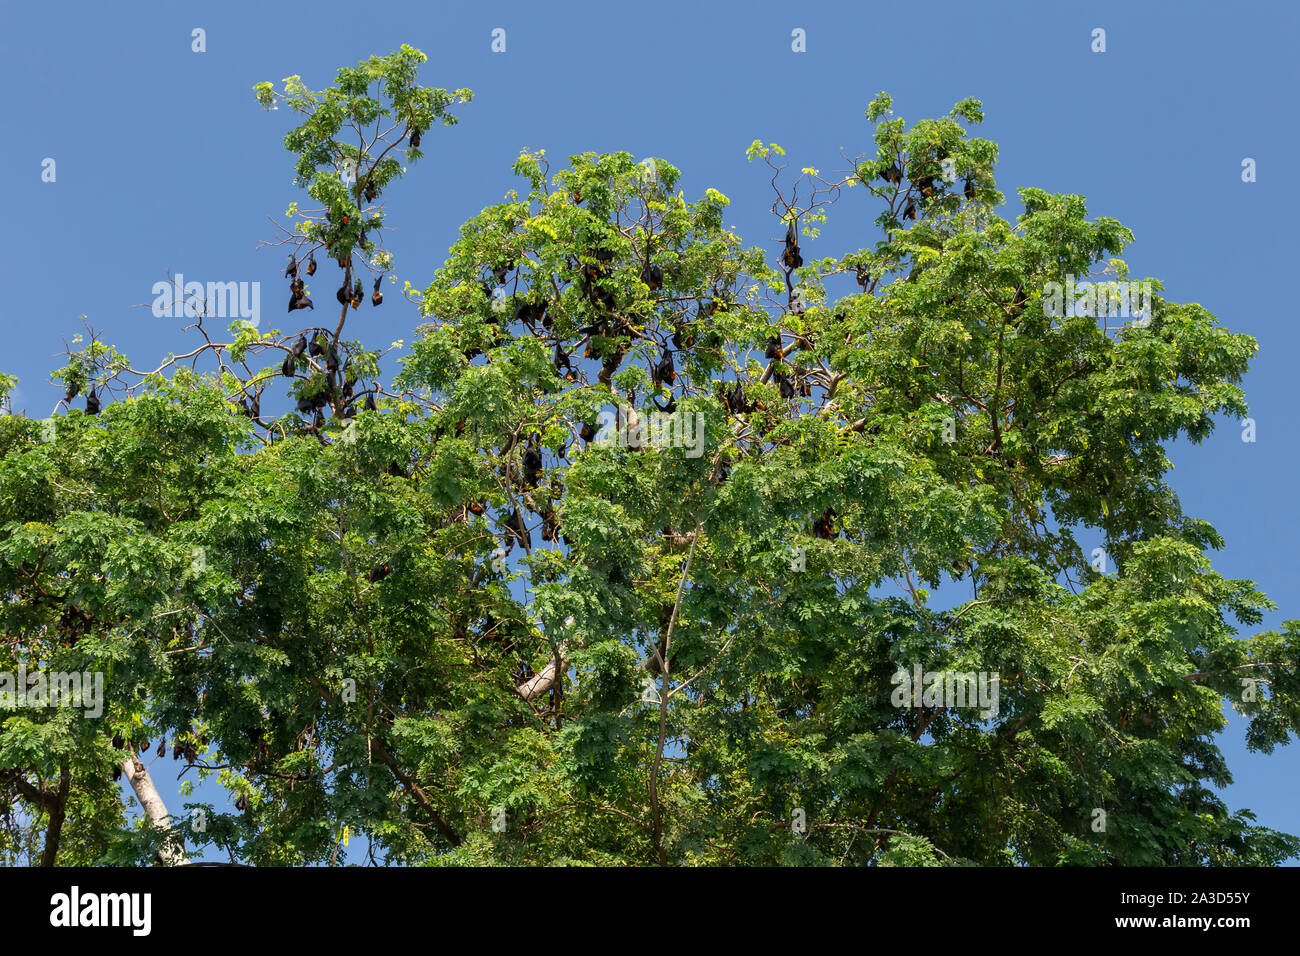 fruit bats hanging from trees in cambodia Stock Photo